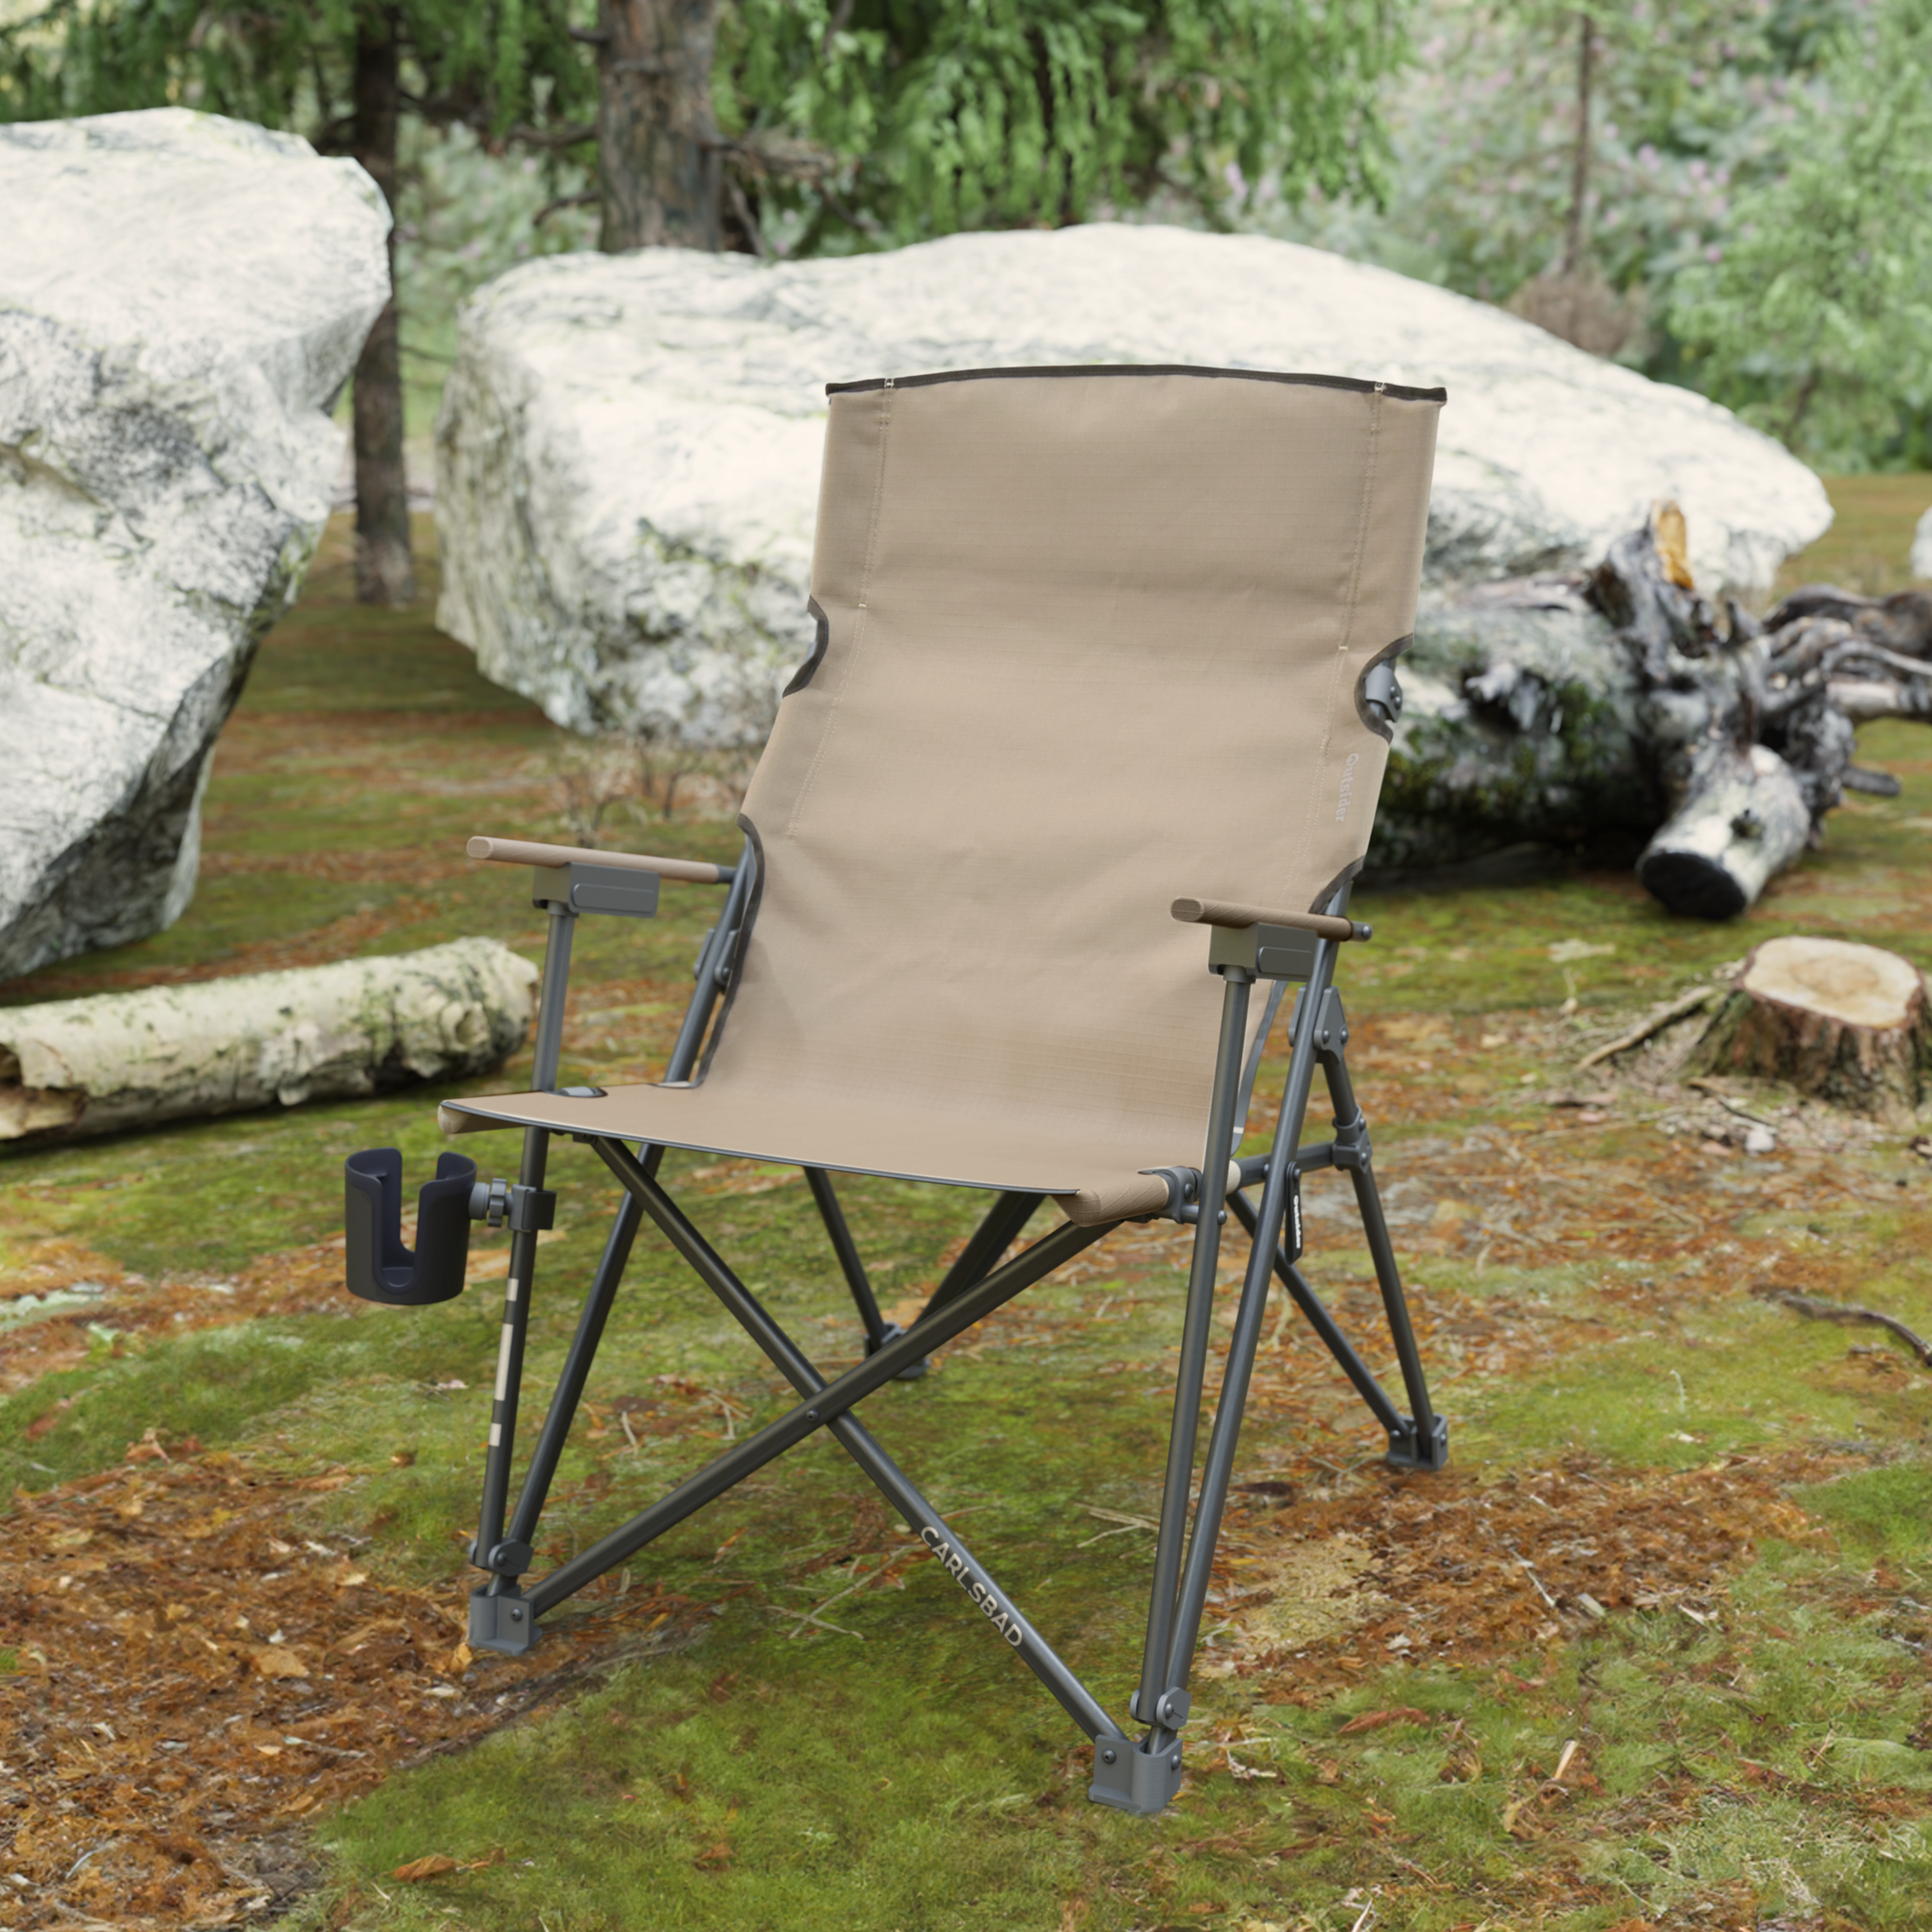 Outsider Carlsbad Folding Camp Chair